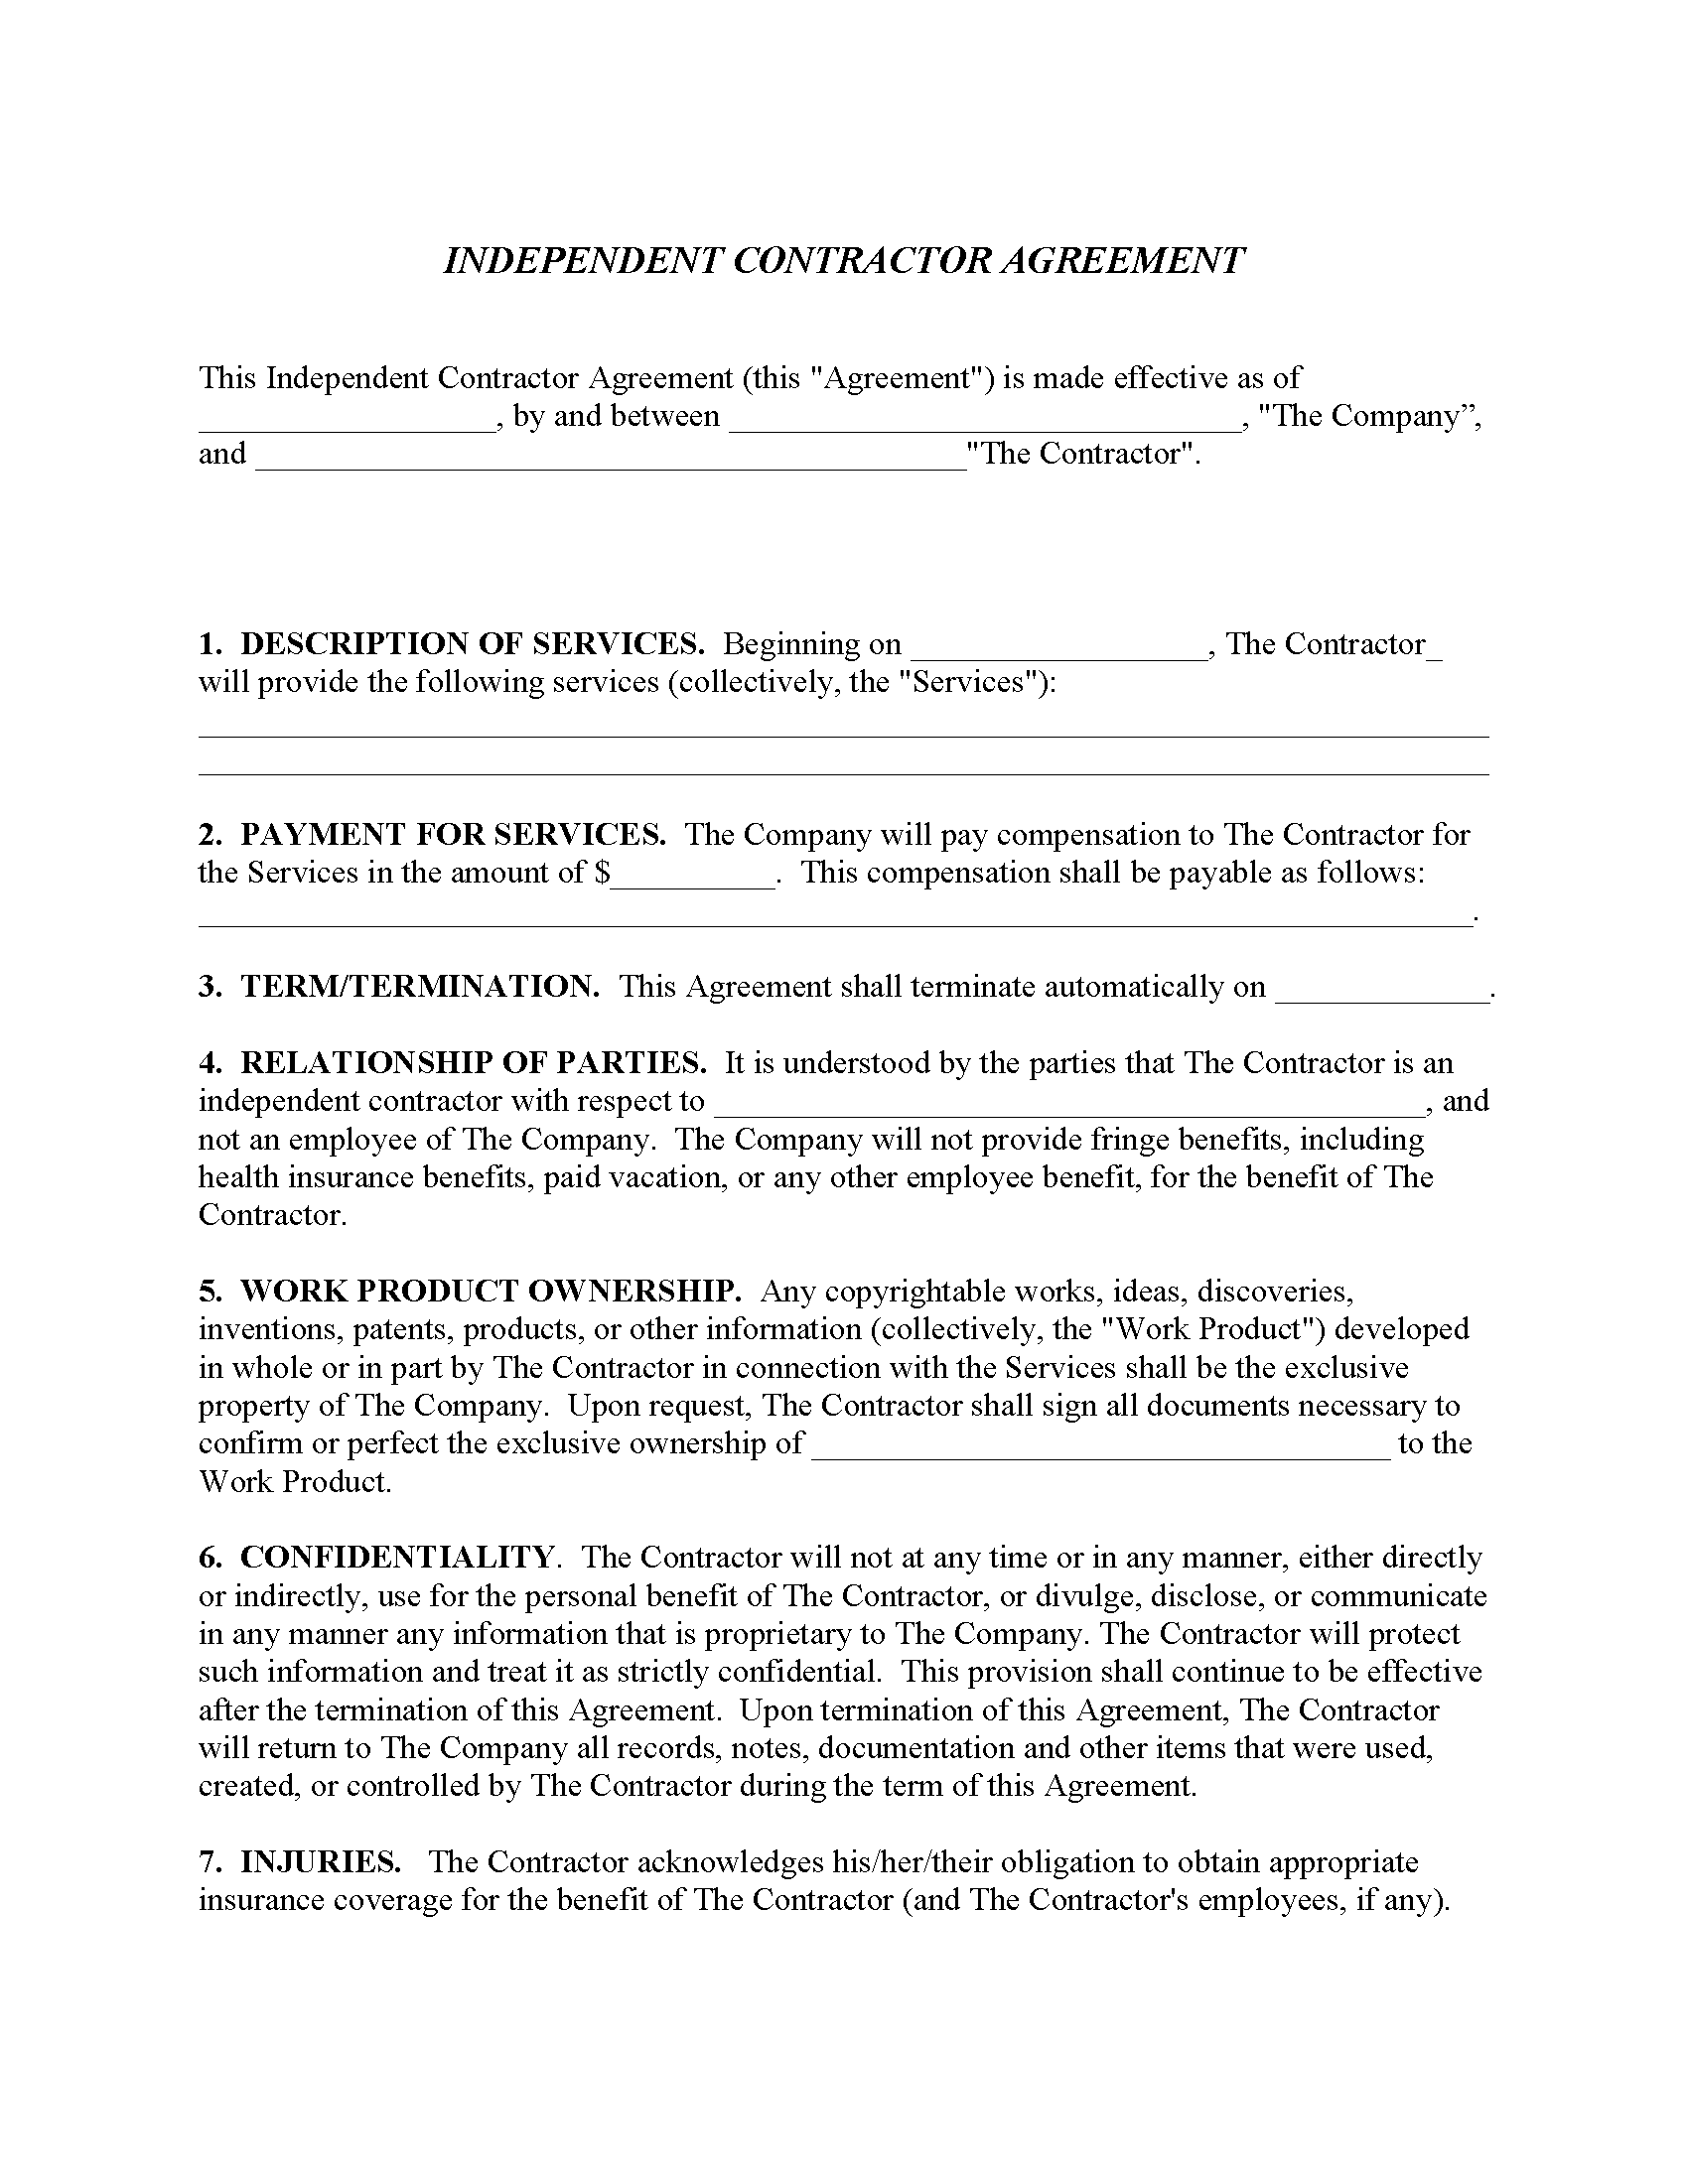 Independent Contractor Agreements Free Printable Legal Forms